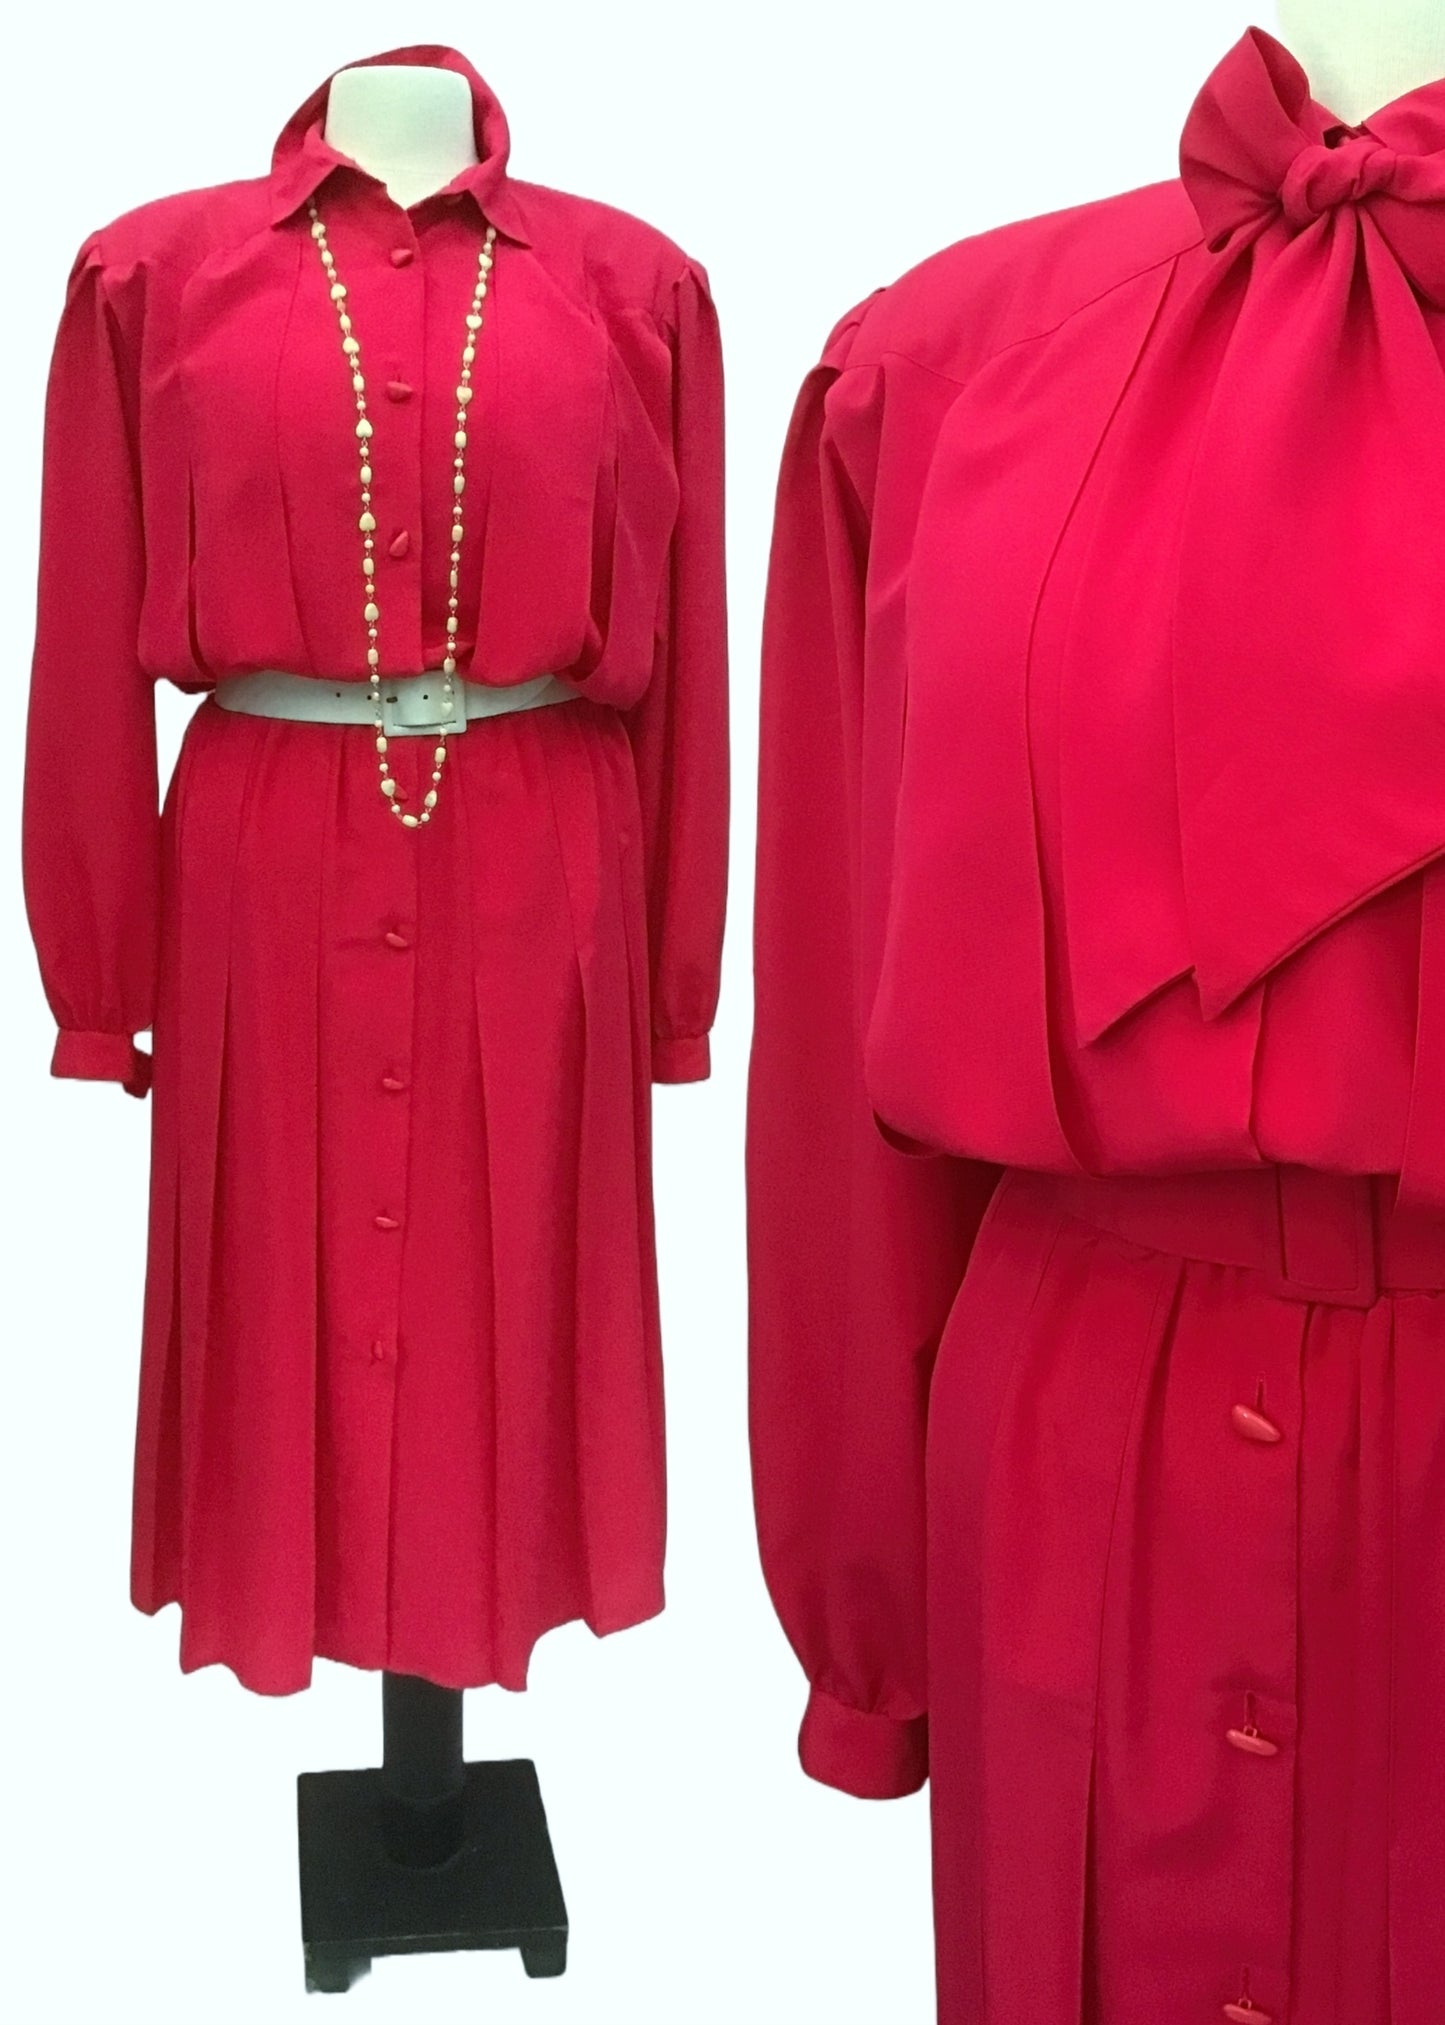 1980s Hot Pink Silky Button Down Day Dress with Long Sleeves Size 14/16